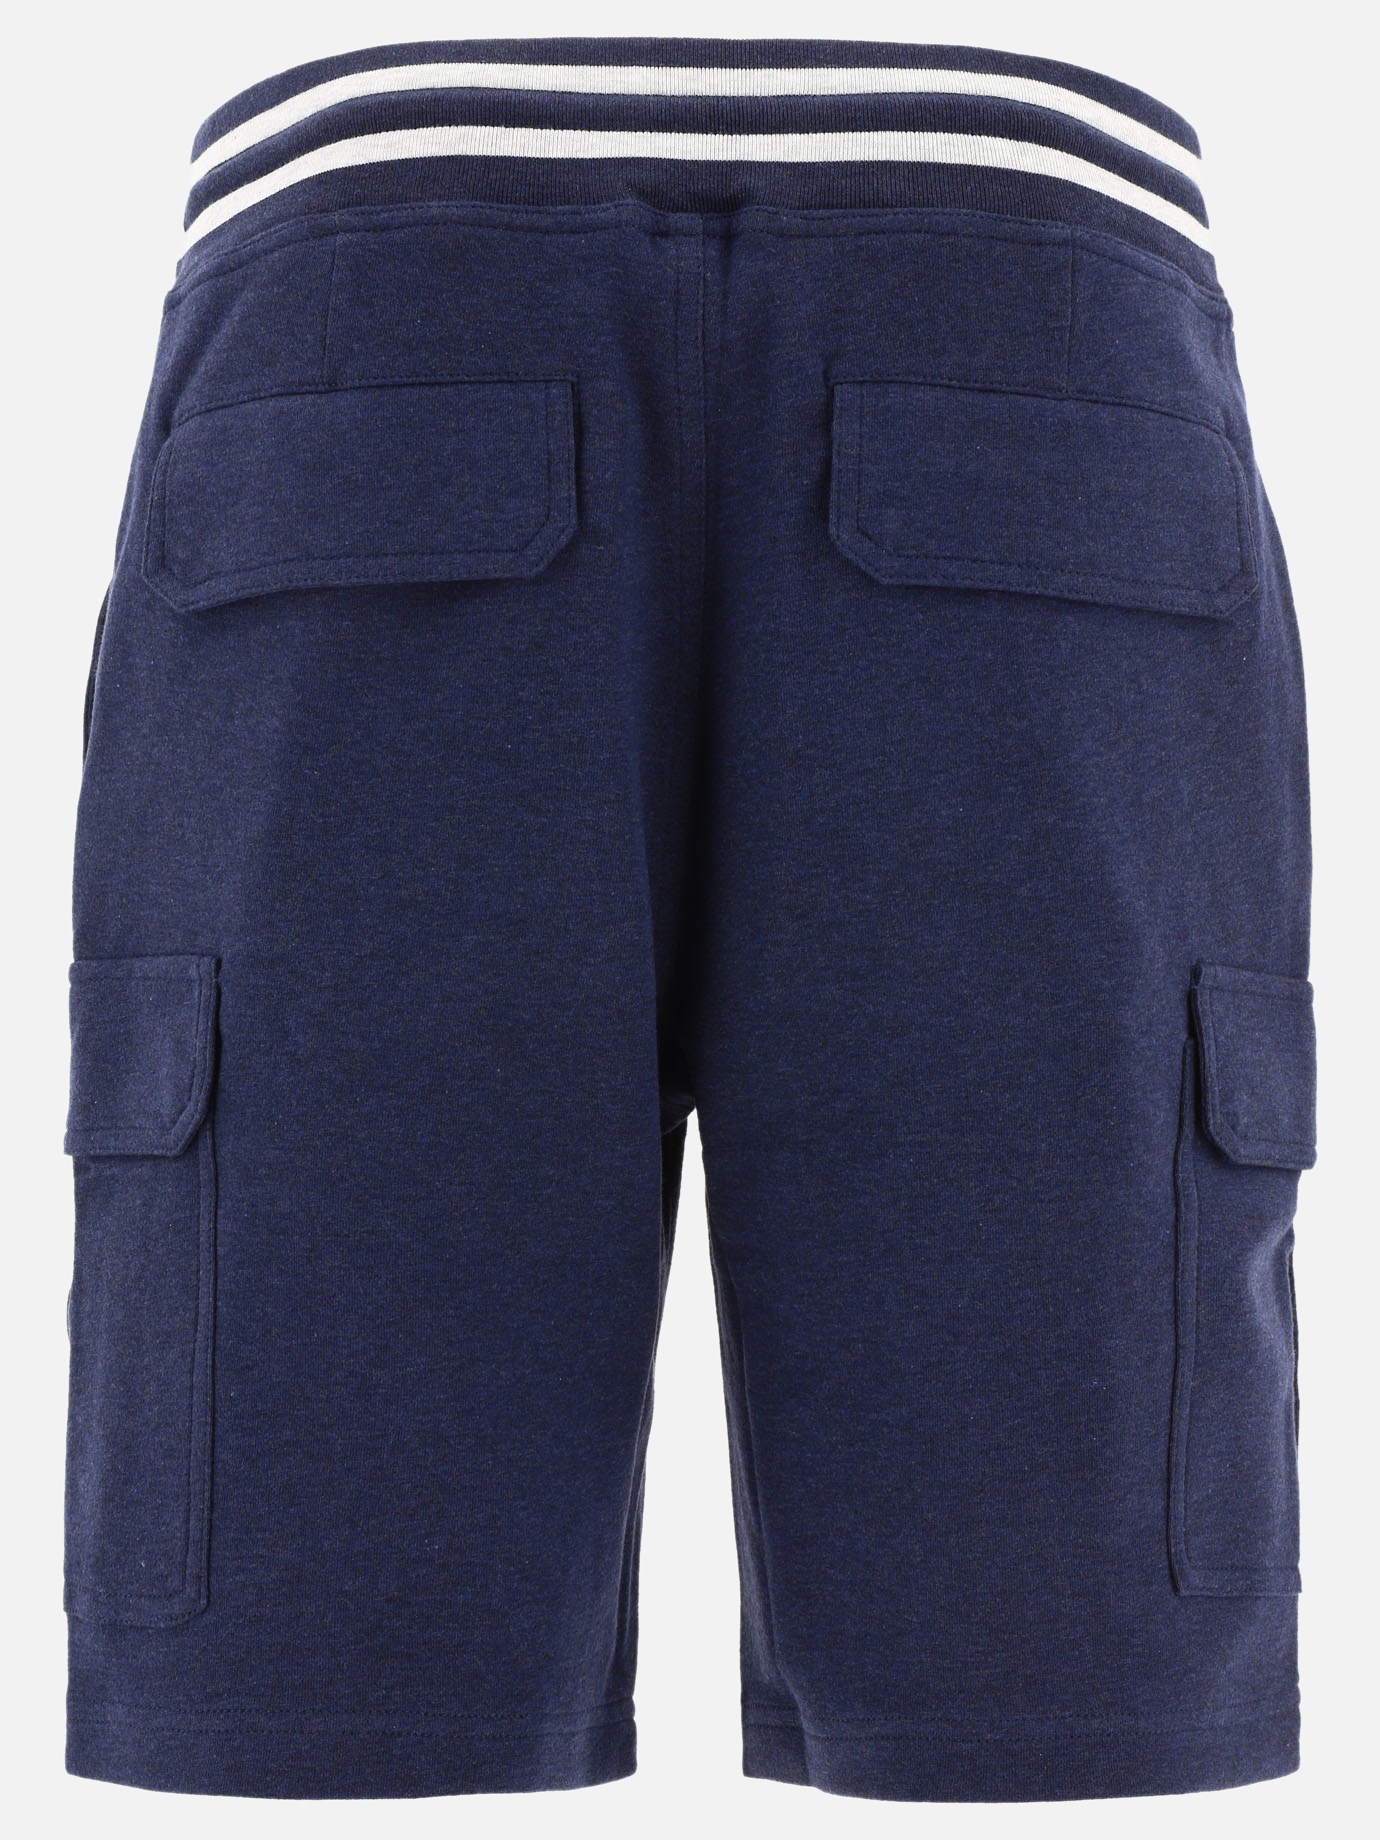 Cargo shorts with drawstring by Brunello Cucinelli